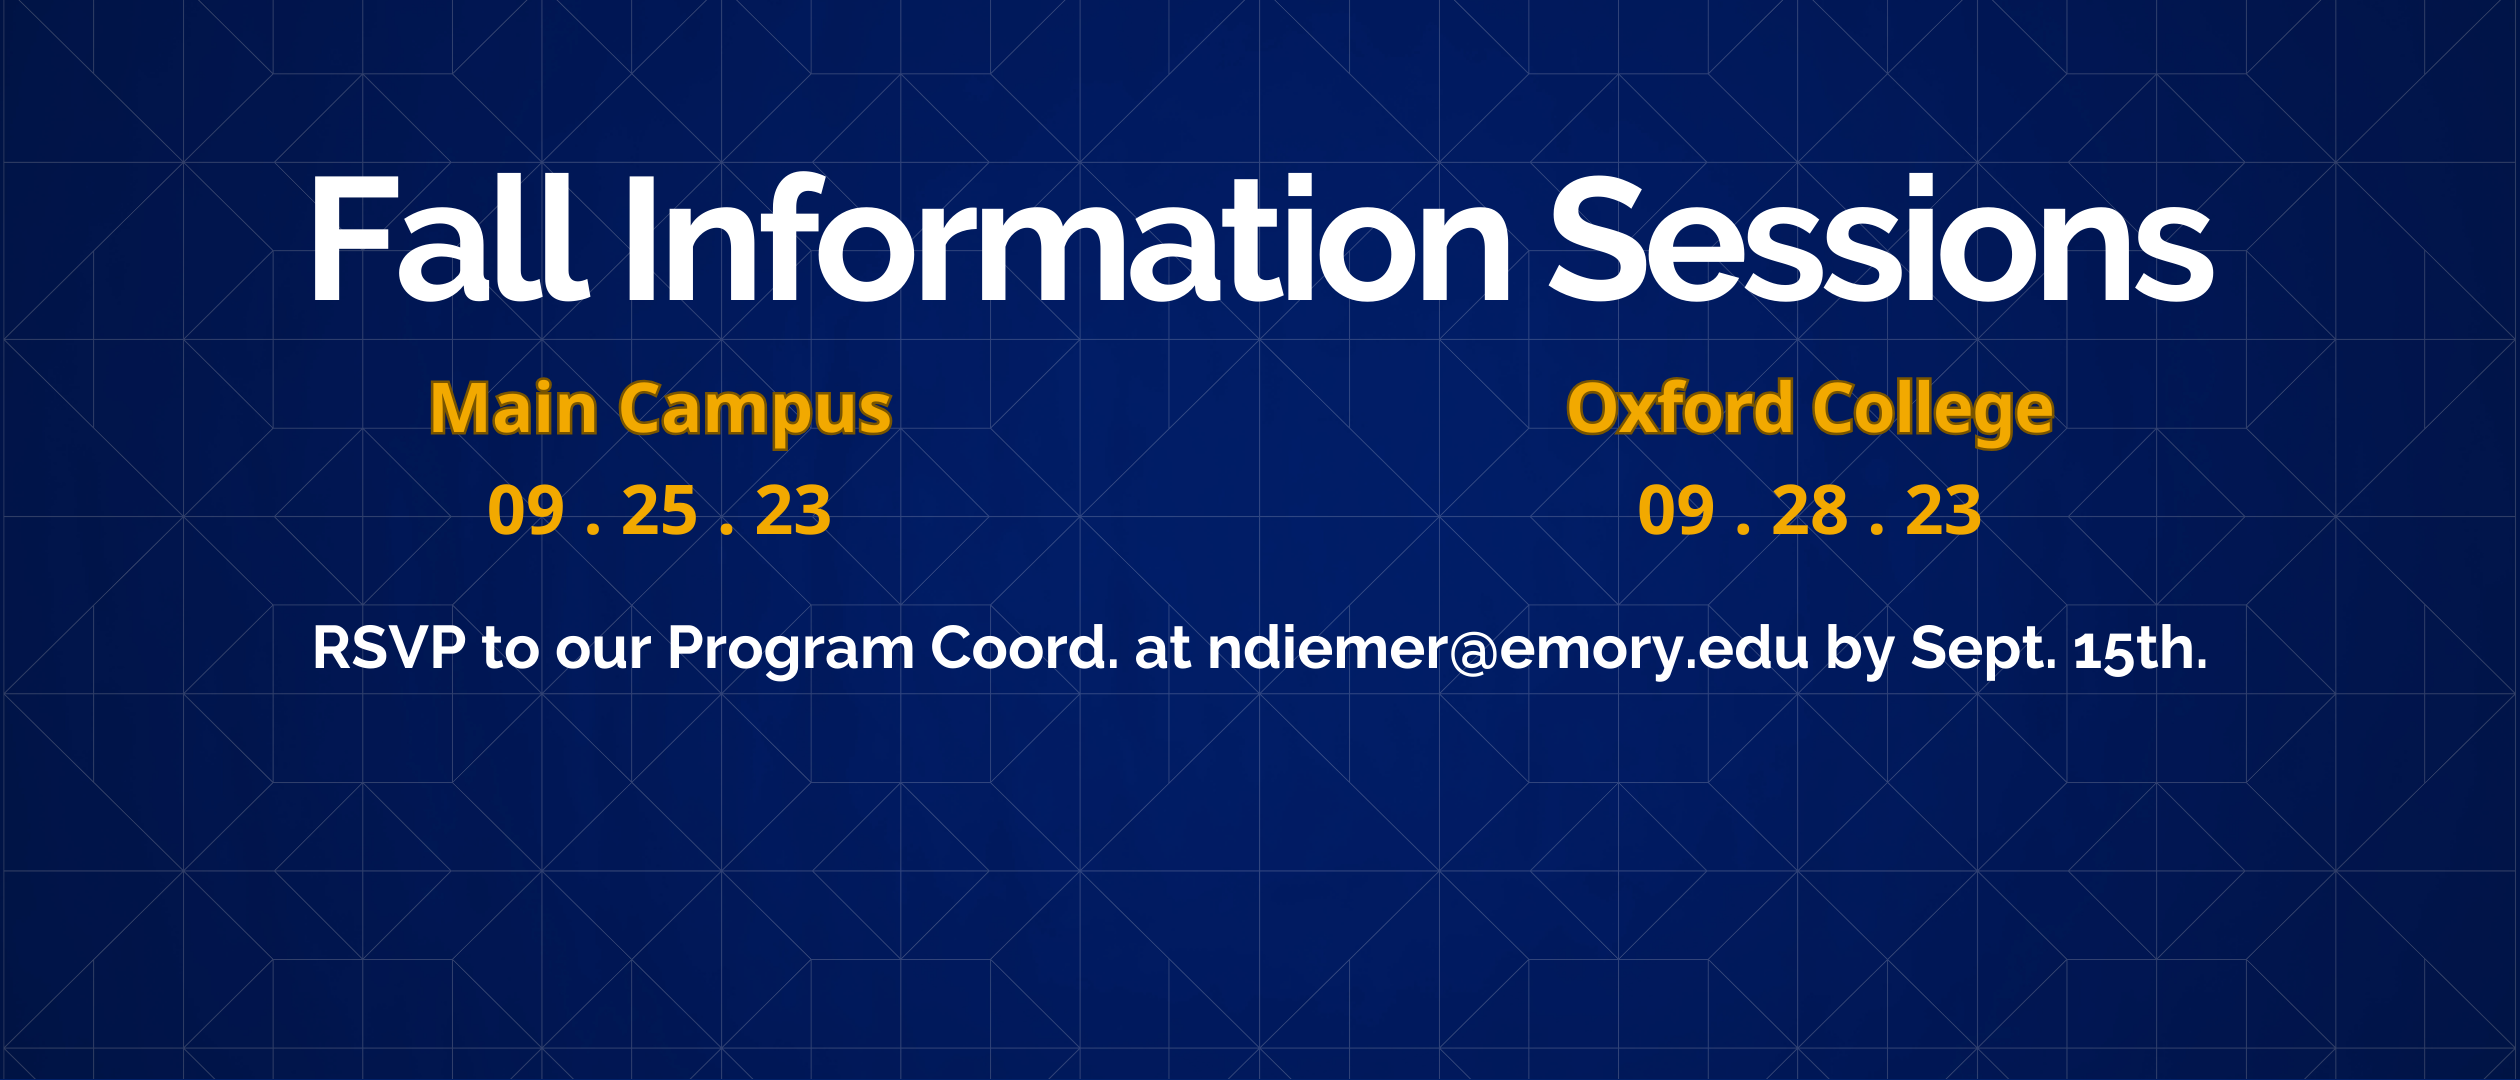 info-sessions-fall